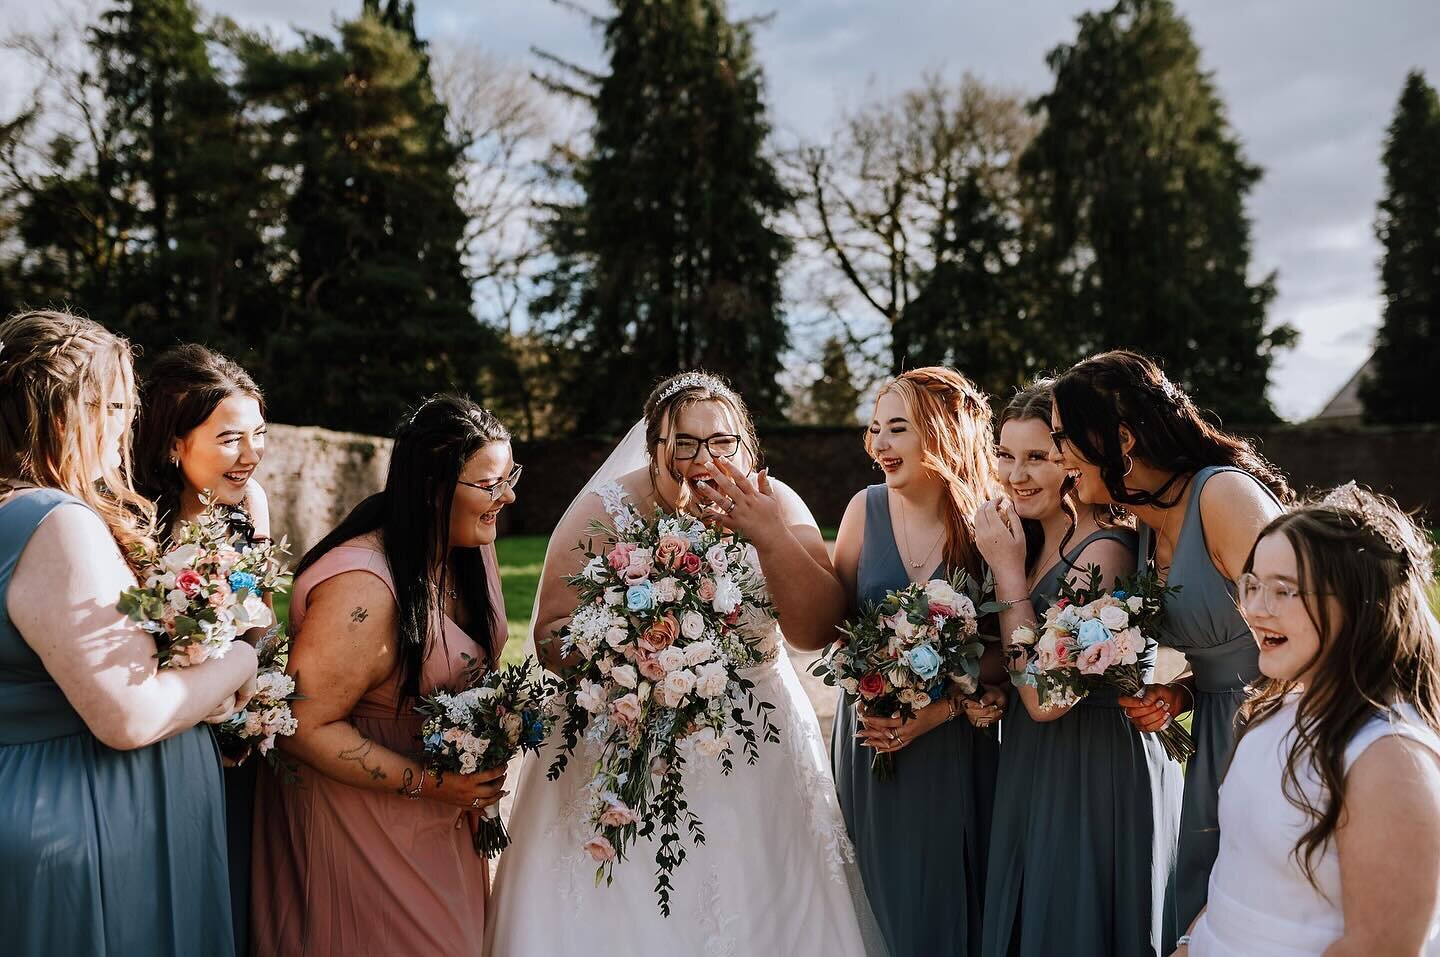 Behind every stunning bride is a squad of fierce and fabulous bridesmaids, ready to slay the day! 📸💃 From laughter-filled moments to heartfelt embraces, capturing the bond between these beautiful ladies is pure magic. Here&rsquo;s to the bridesmaid